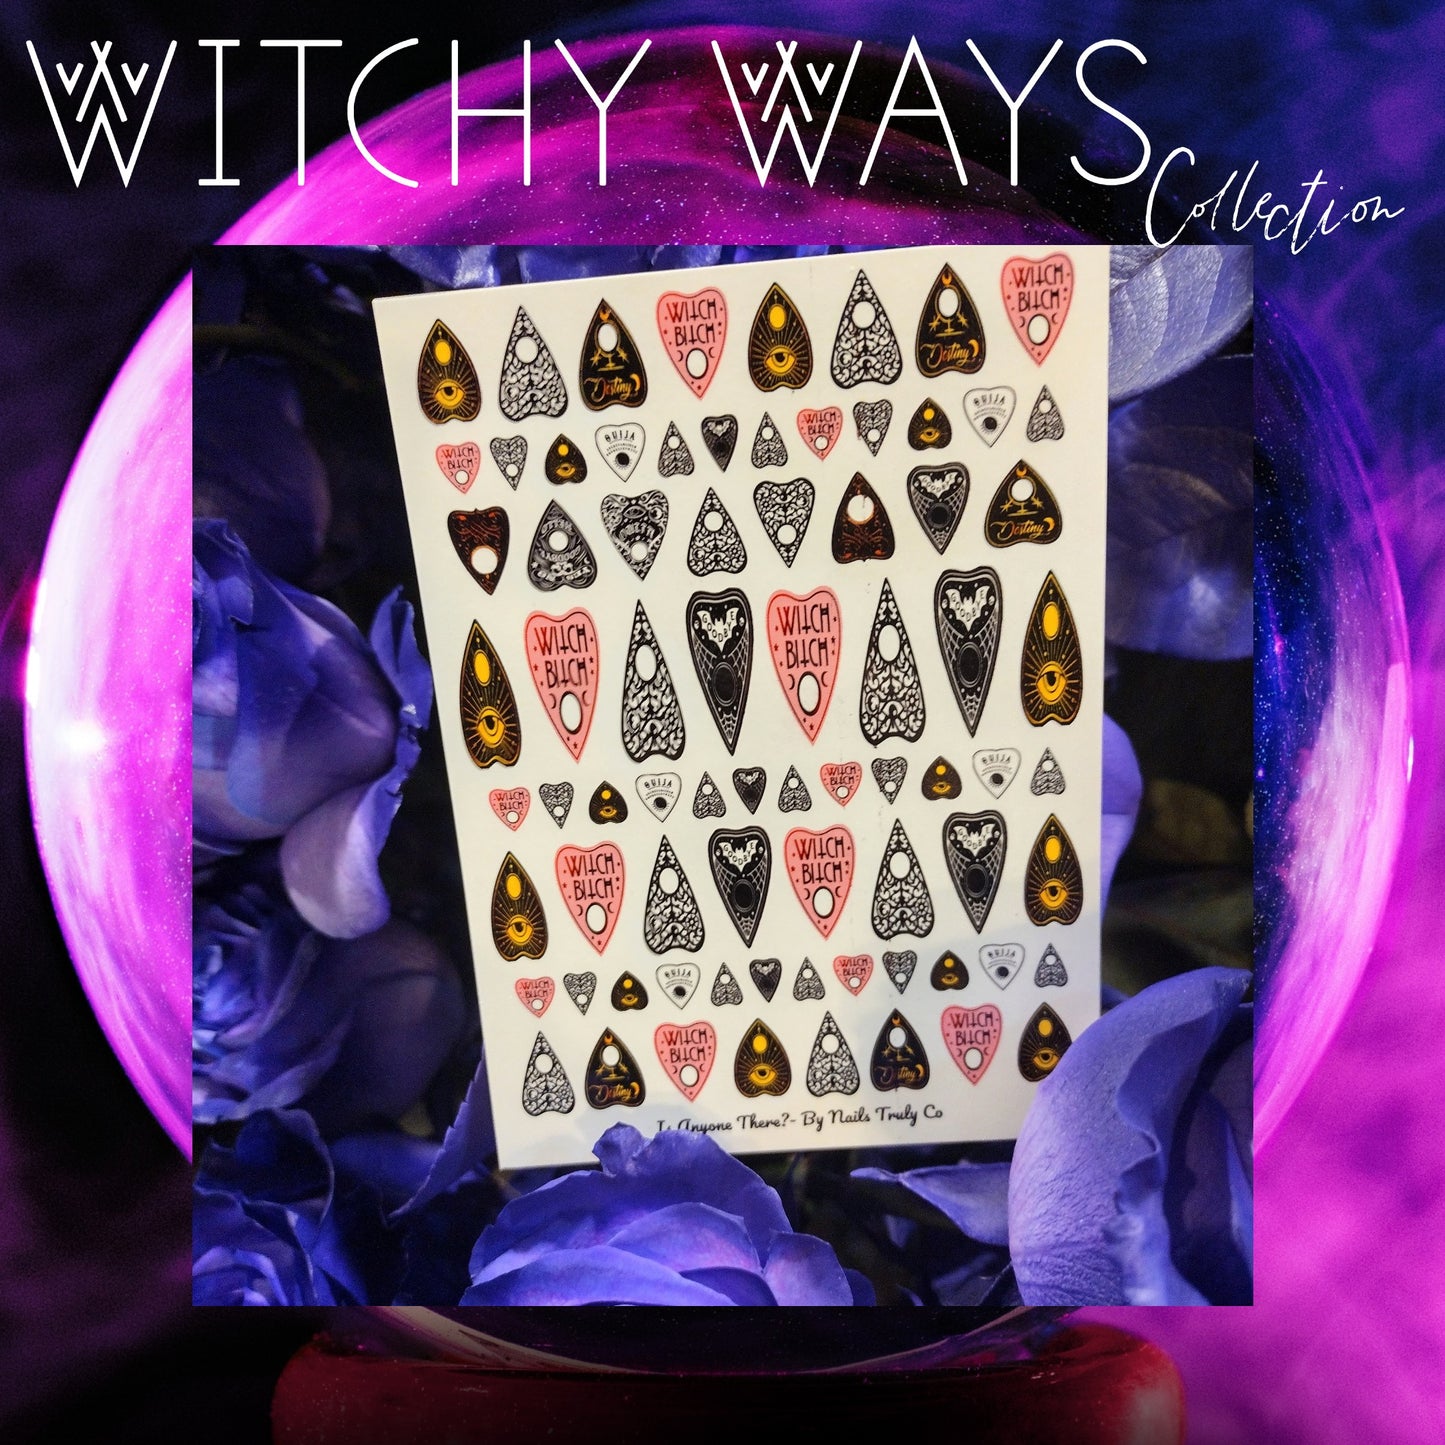 Witchy Nail Art - Is Anyone There?